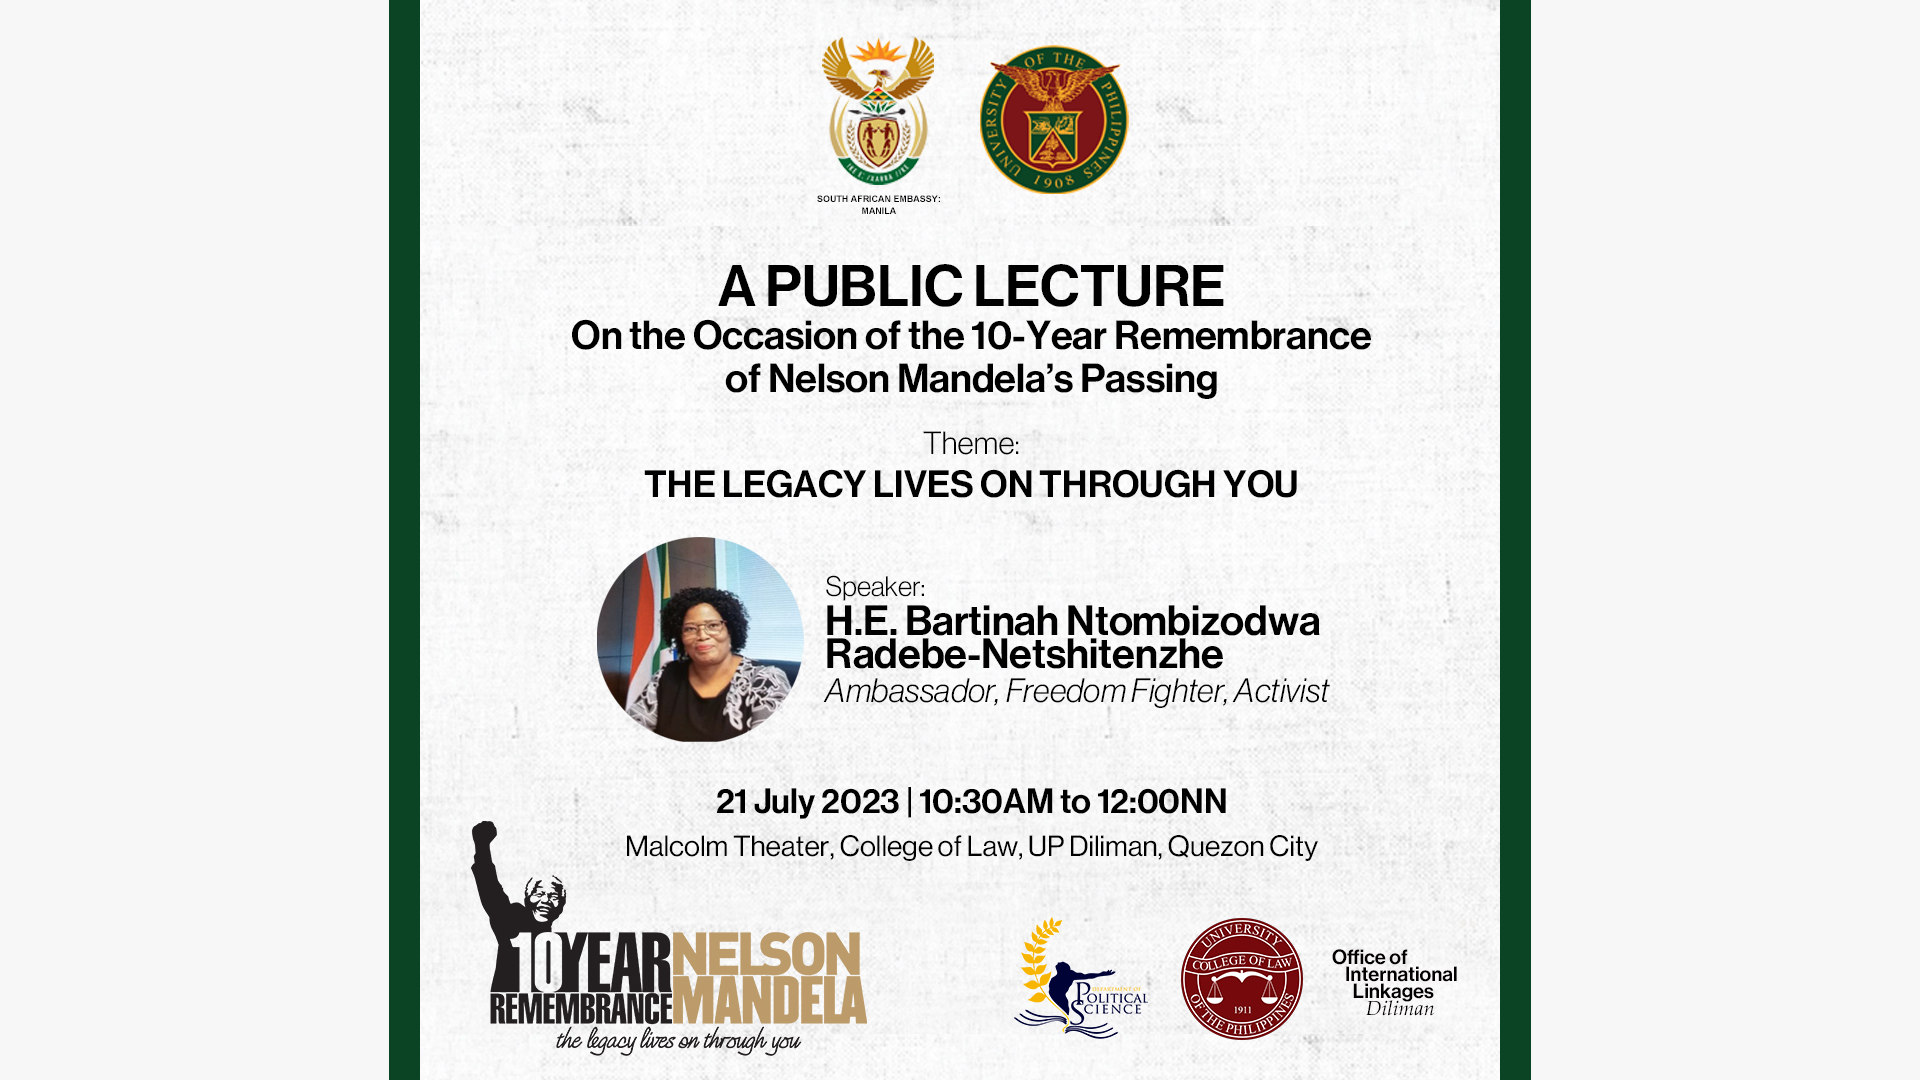 10-Year Remembrance on Nelson Mandela’s Passing